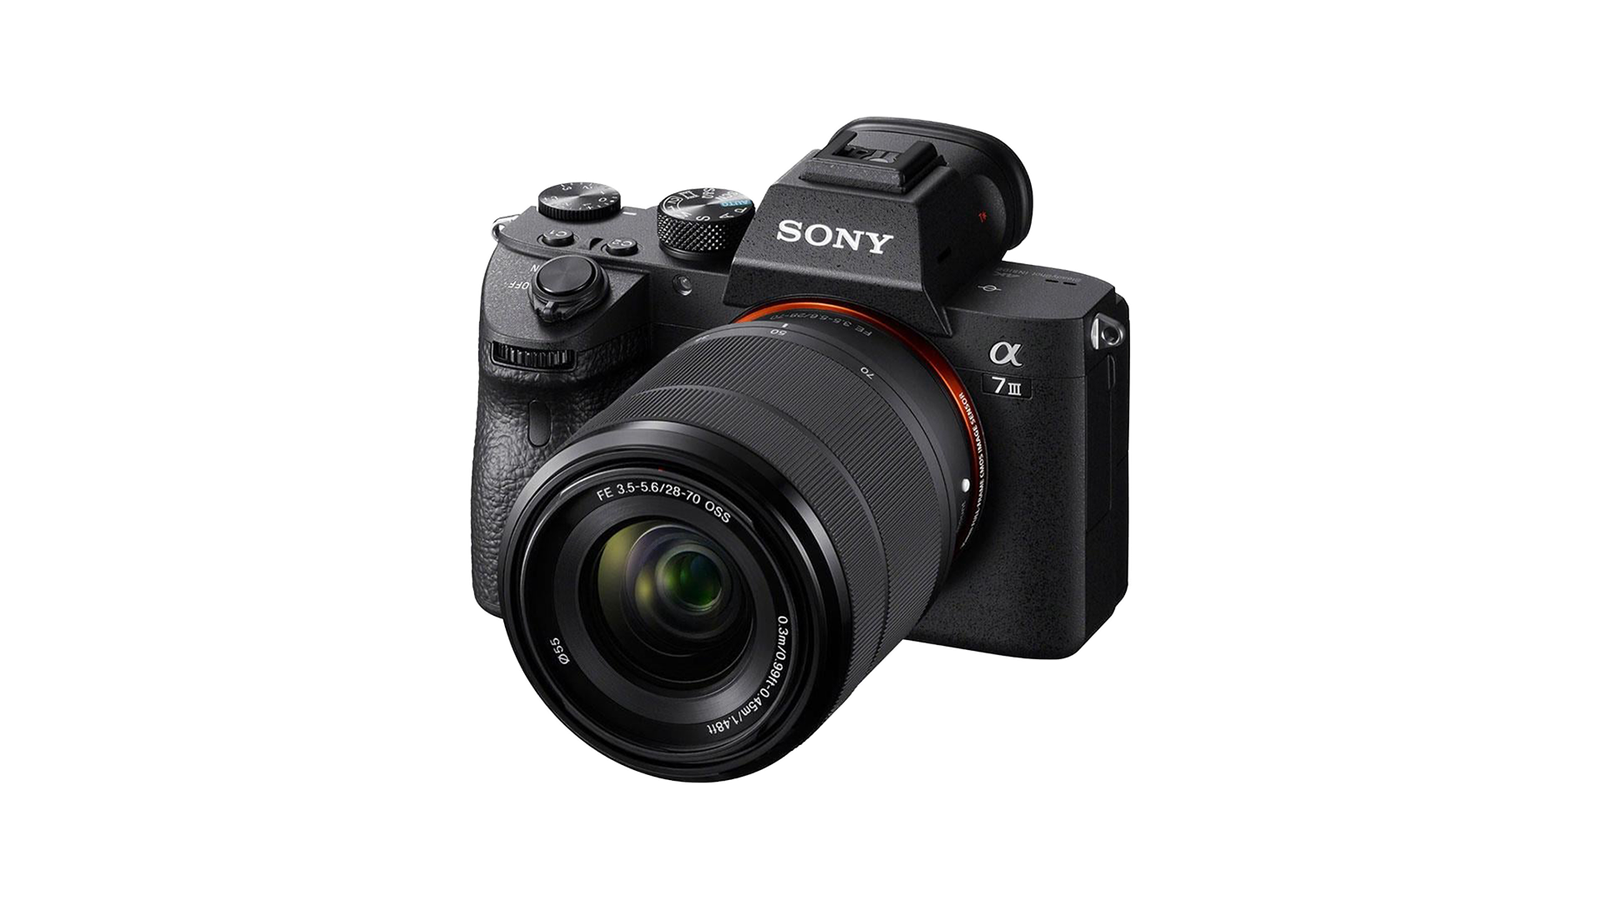 Sony A7 III - The best Sony camera overall